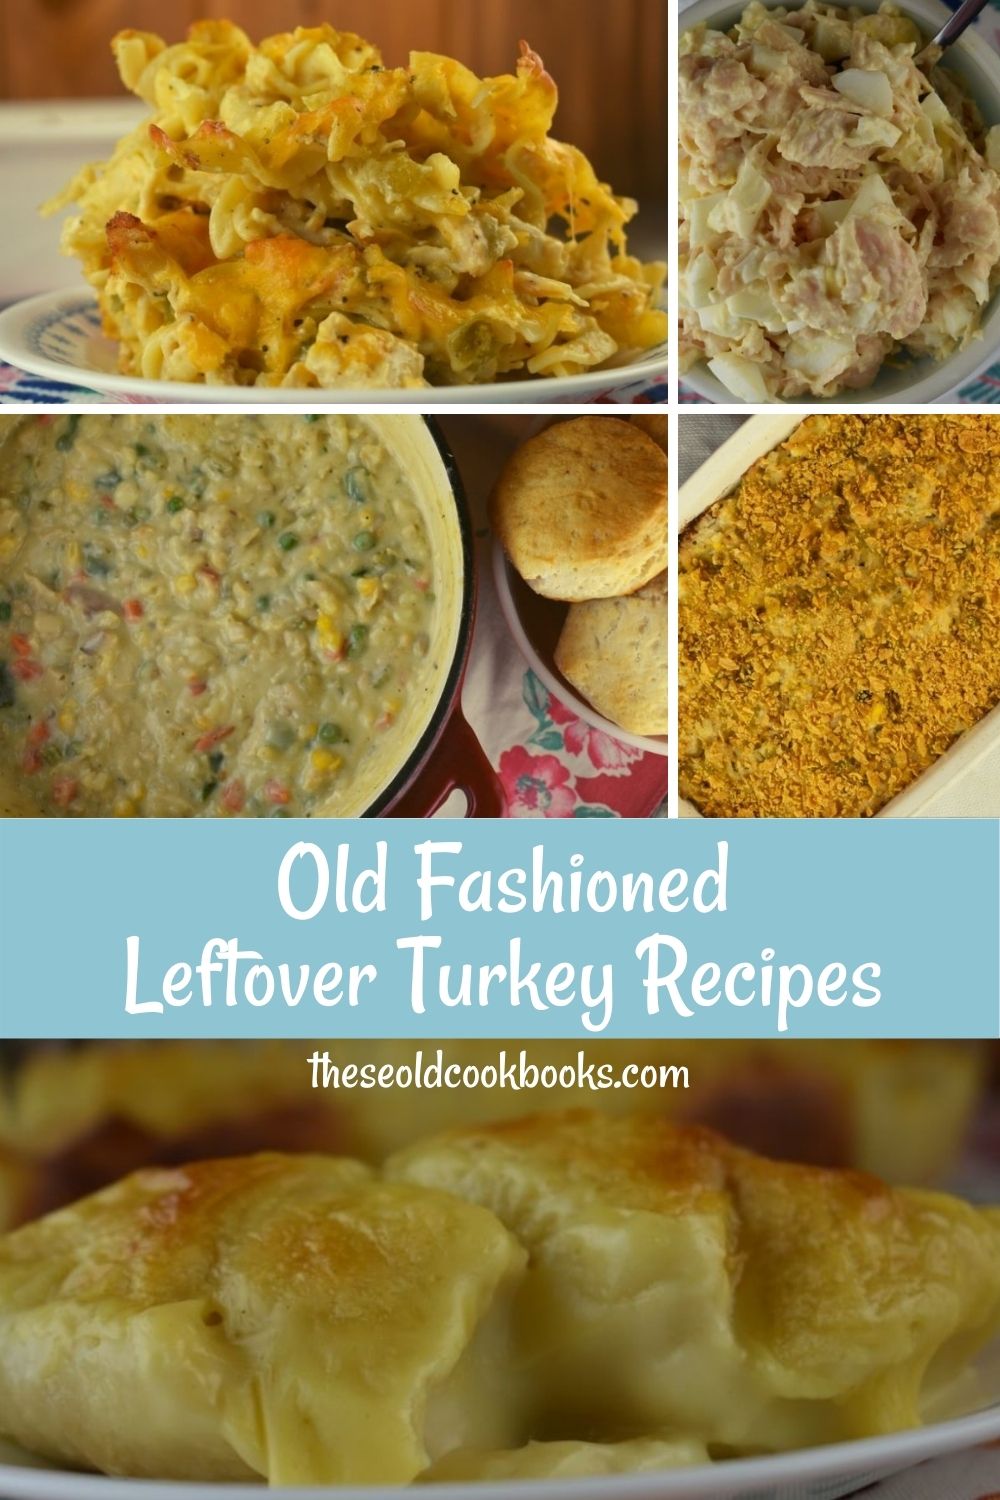 When you have leftover turkey or chicken in the fridge, try these 5 Leftover Turkey Recipes to keep your family happy while not wasting perfectly good food.